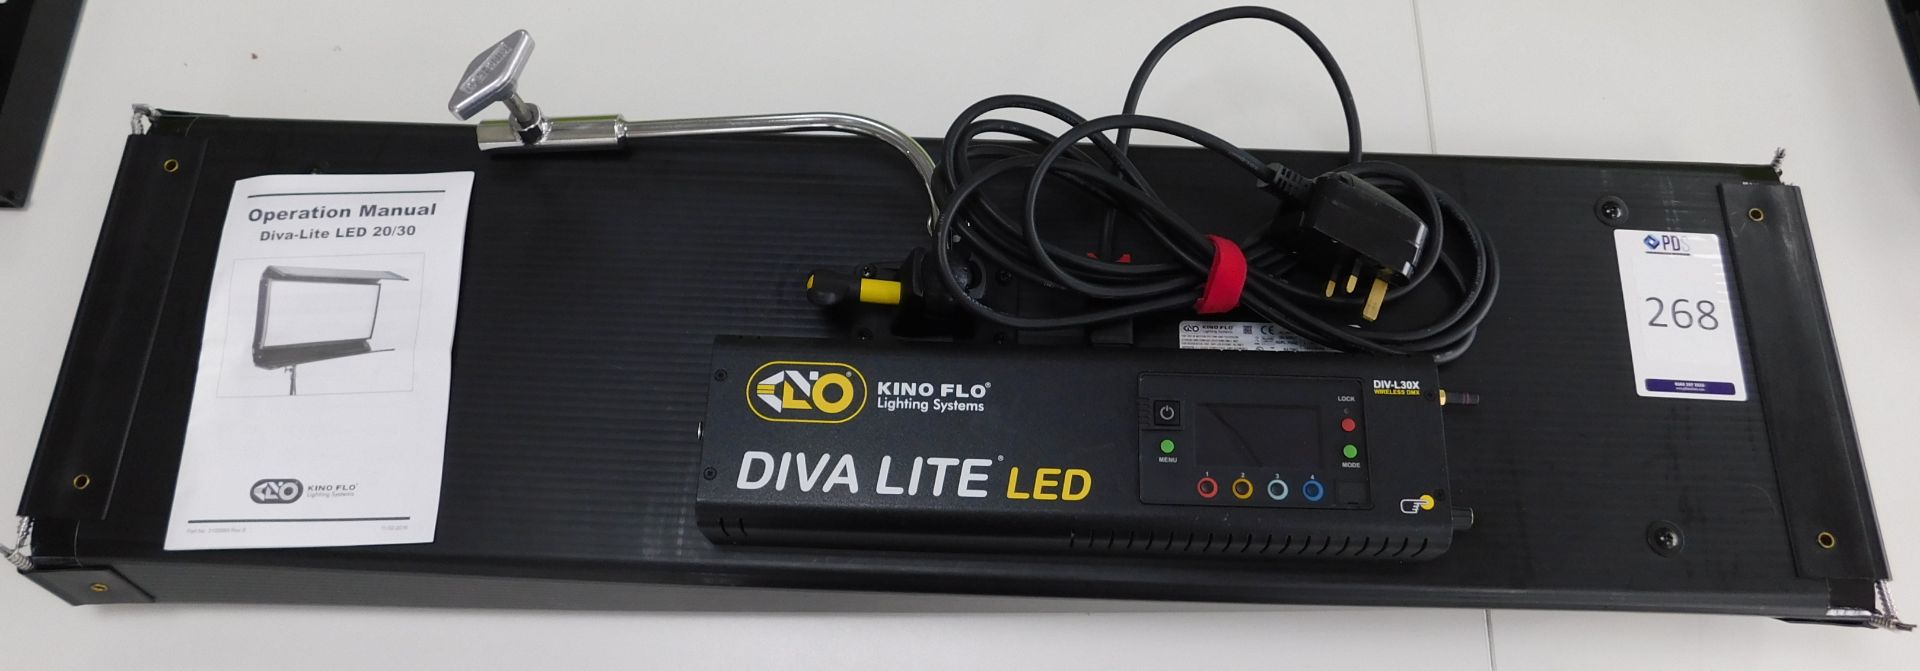 Kino Flow DIV-L30X Diva Lite LED (Location: Westminster. Please Refer to General Notes) - Image 2 of 3